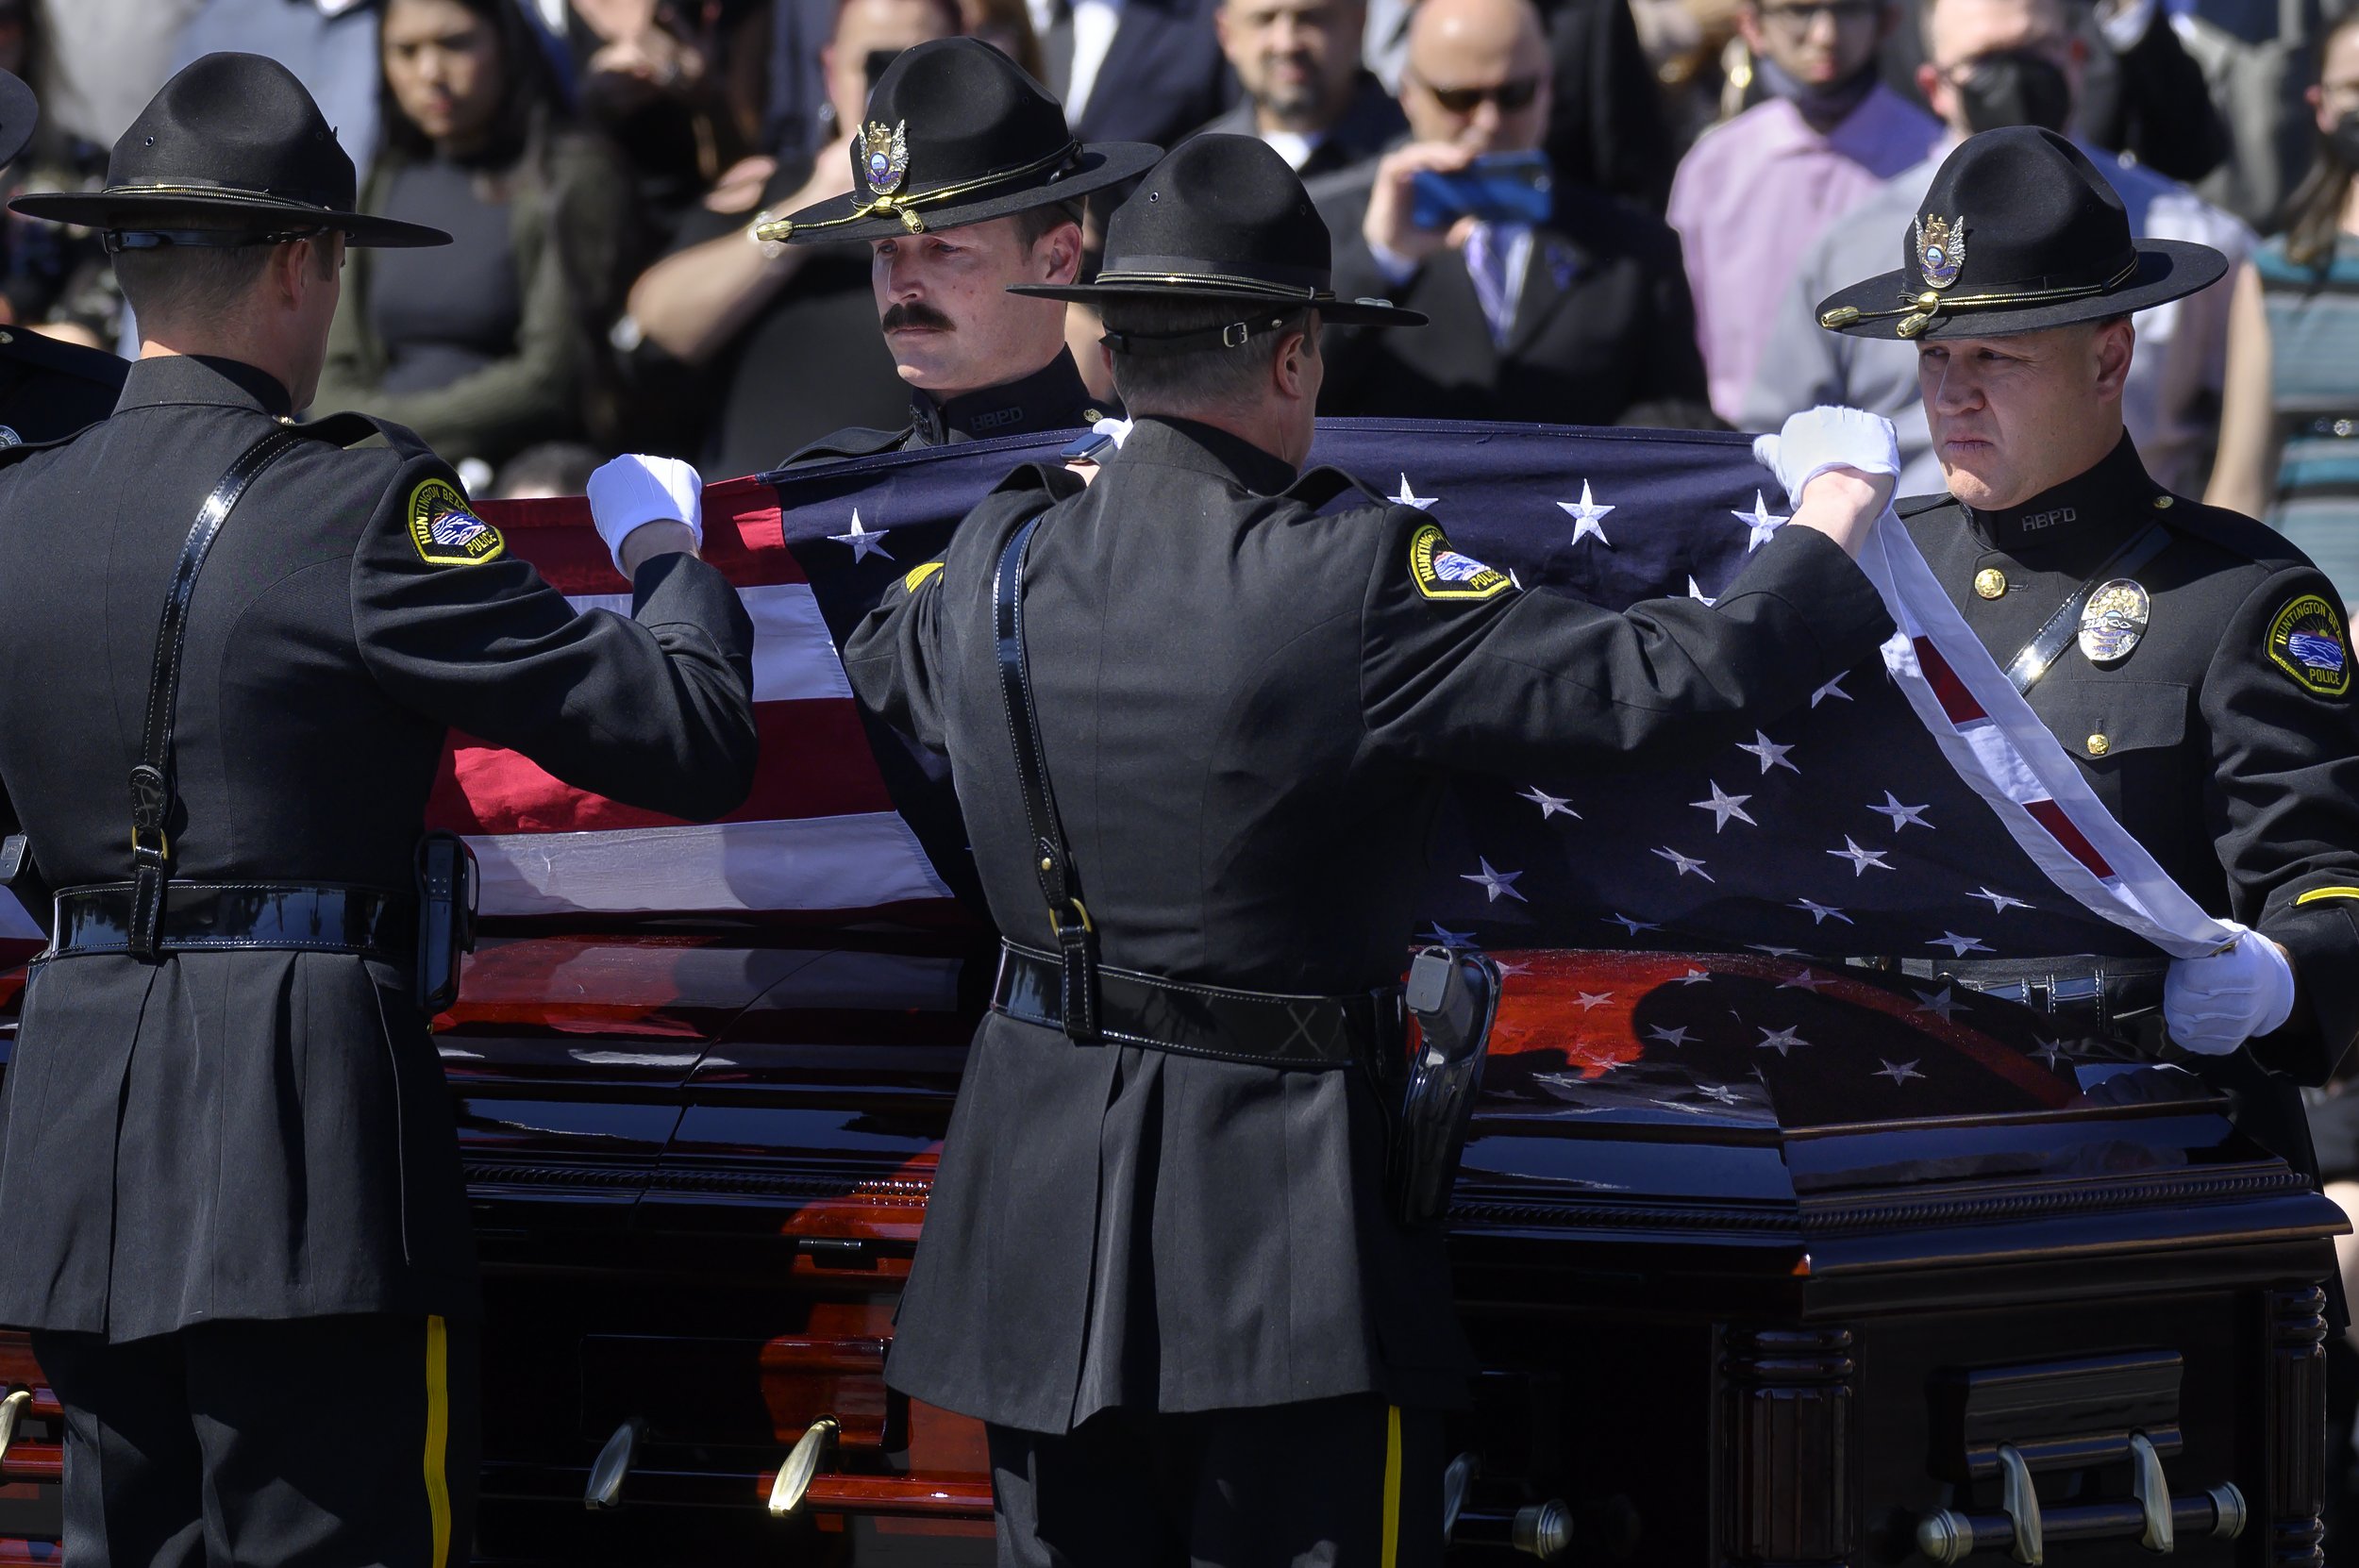  Huntington Beach Police Officers remove the flag from Officer Nicholas Vella’a casket on Tuesday, March 8, 2022. Vella died in a helicopter crash Feb. 19 off the waters in Newport Beach. He was an 18-year law enforcement veteran with 14 years on the